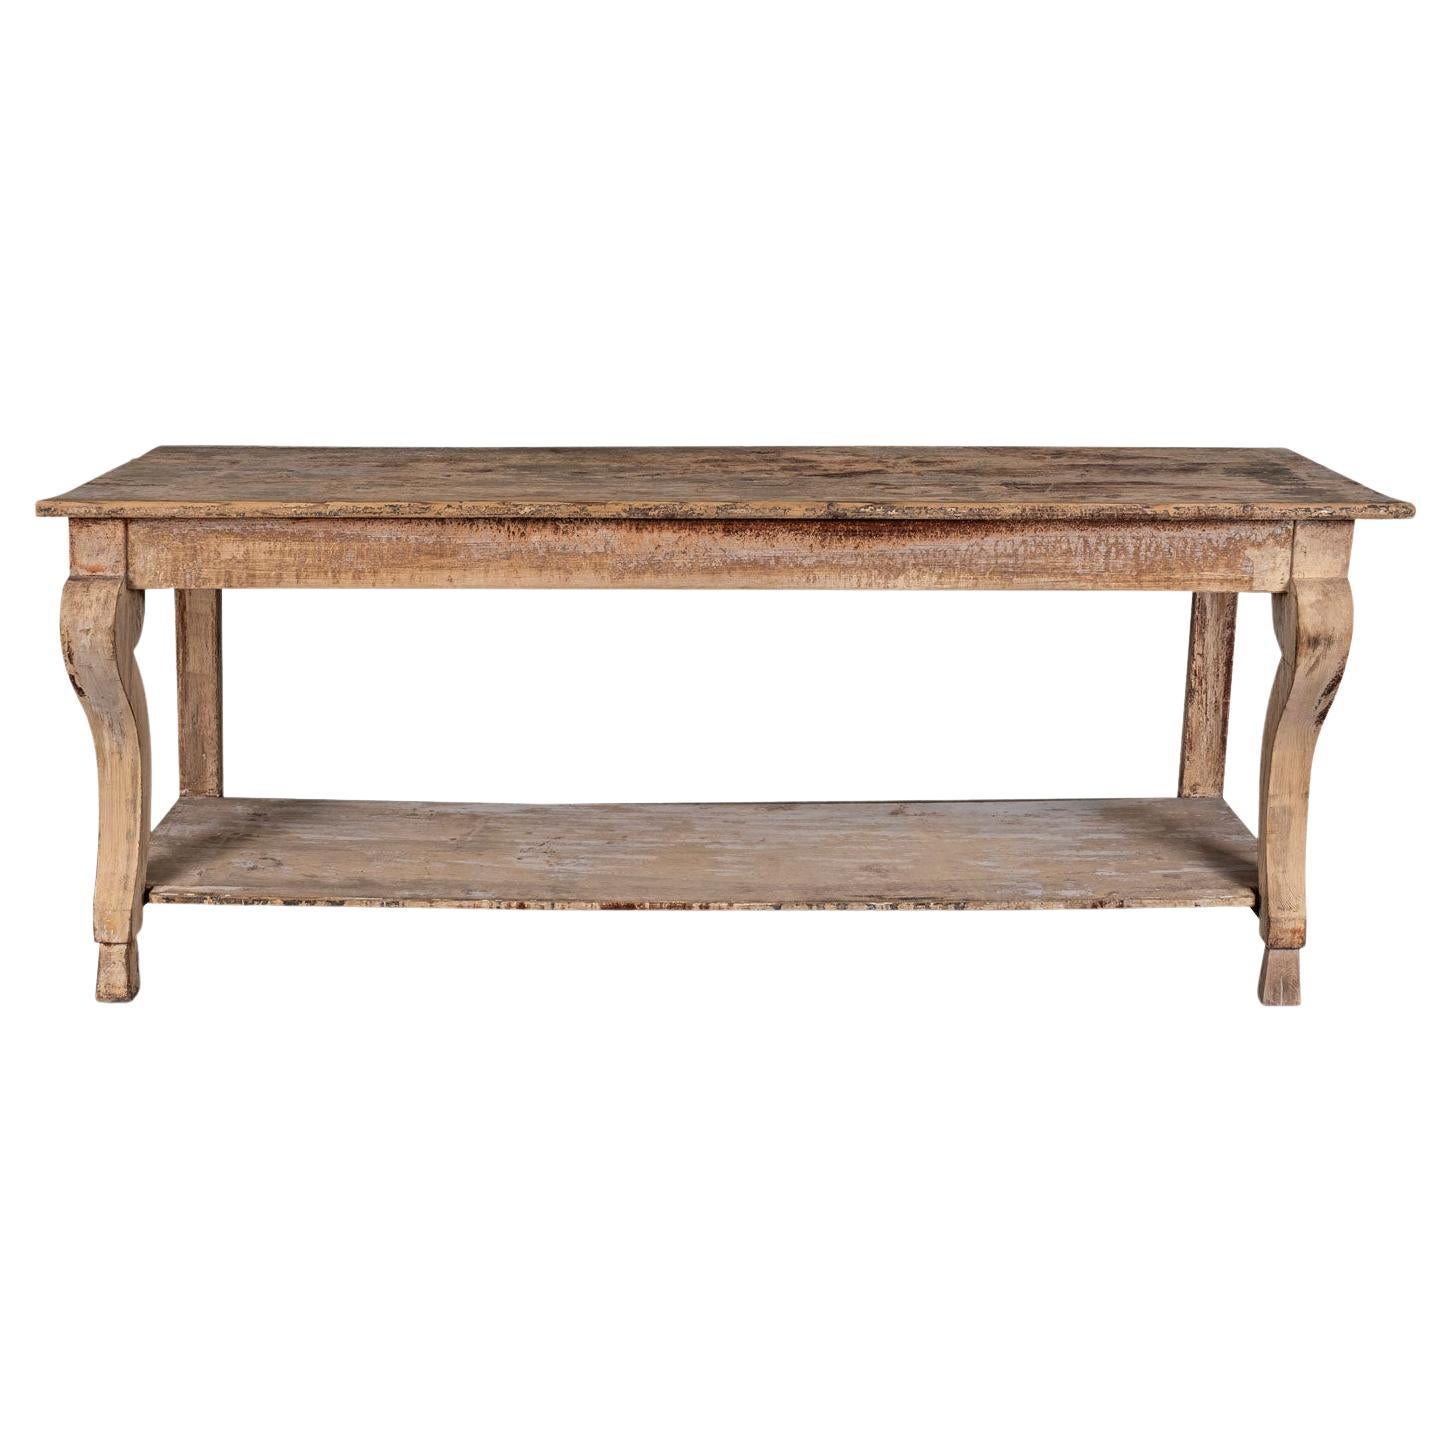 Large-scale painted console table, designed in neoclassical style. Large-scale long console, with a full-length under-shelf and hoof-shaped front feet. Remnants of early paint decorate console's scraped back surface.

Note: Regional differences in